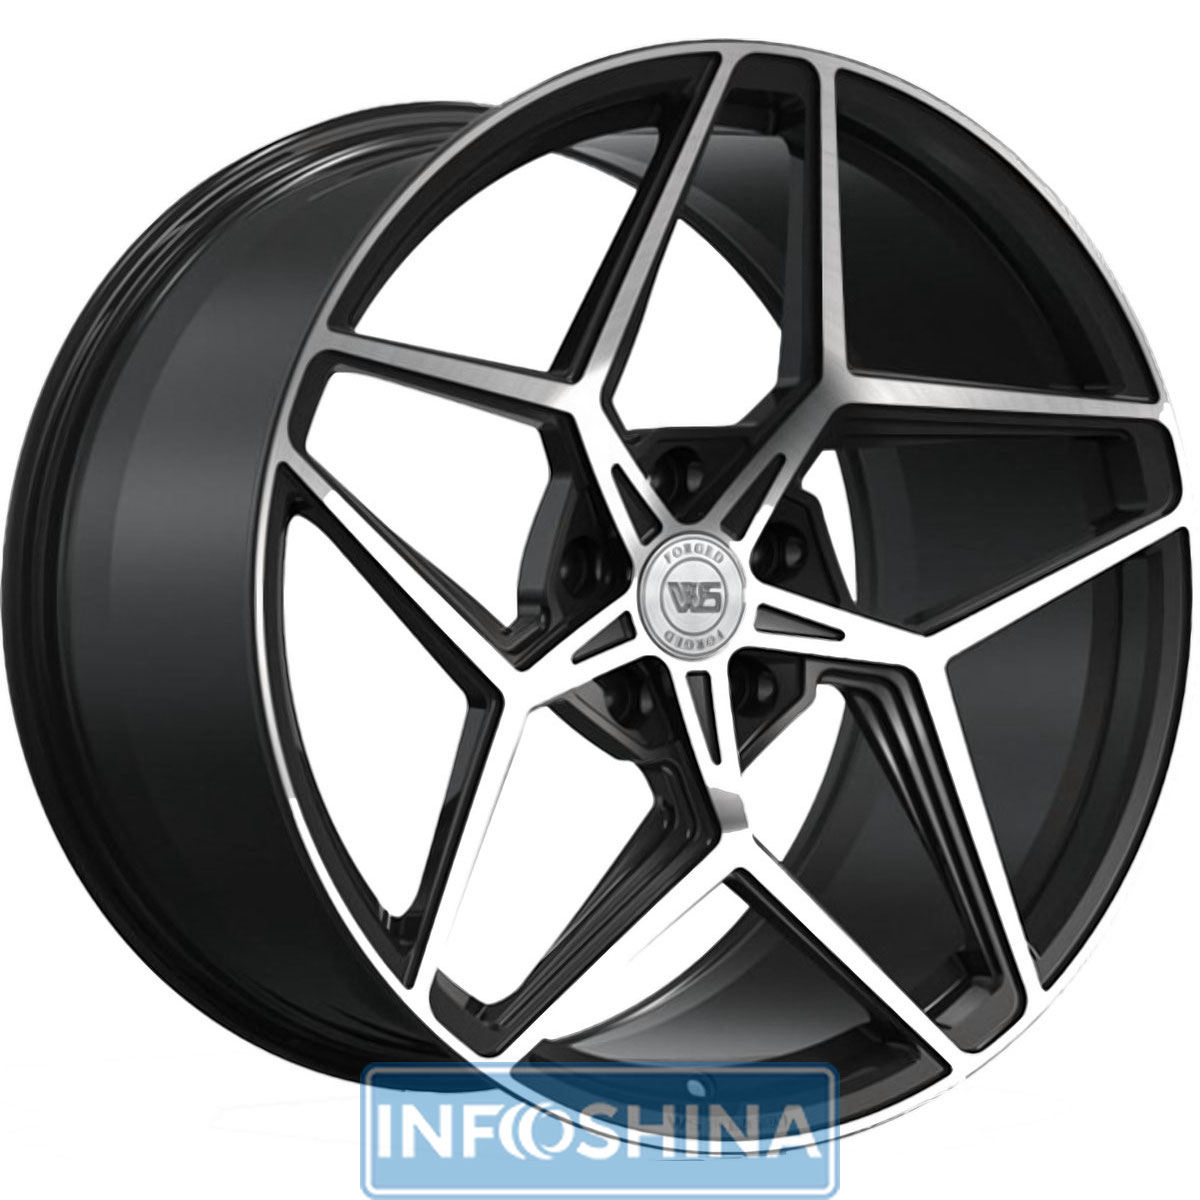 Купить диски WS Forged WS2125 Satin Black With Machined Face R20 W11 PCD5x120 ET43 DIA66.9